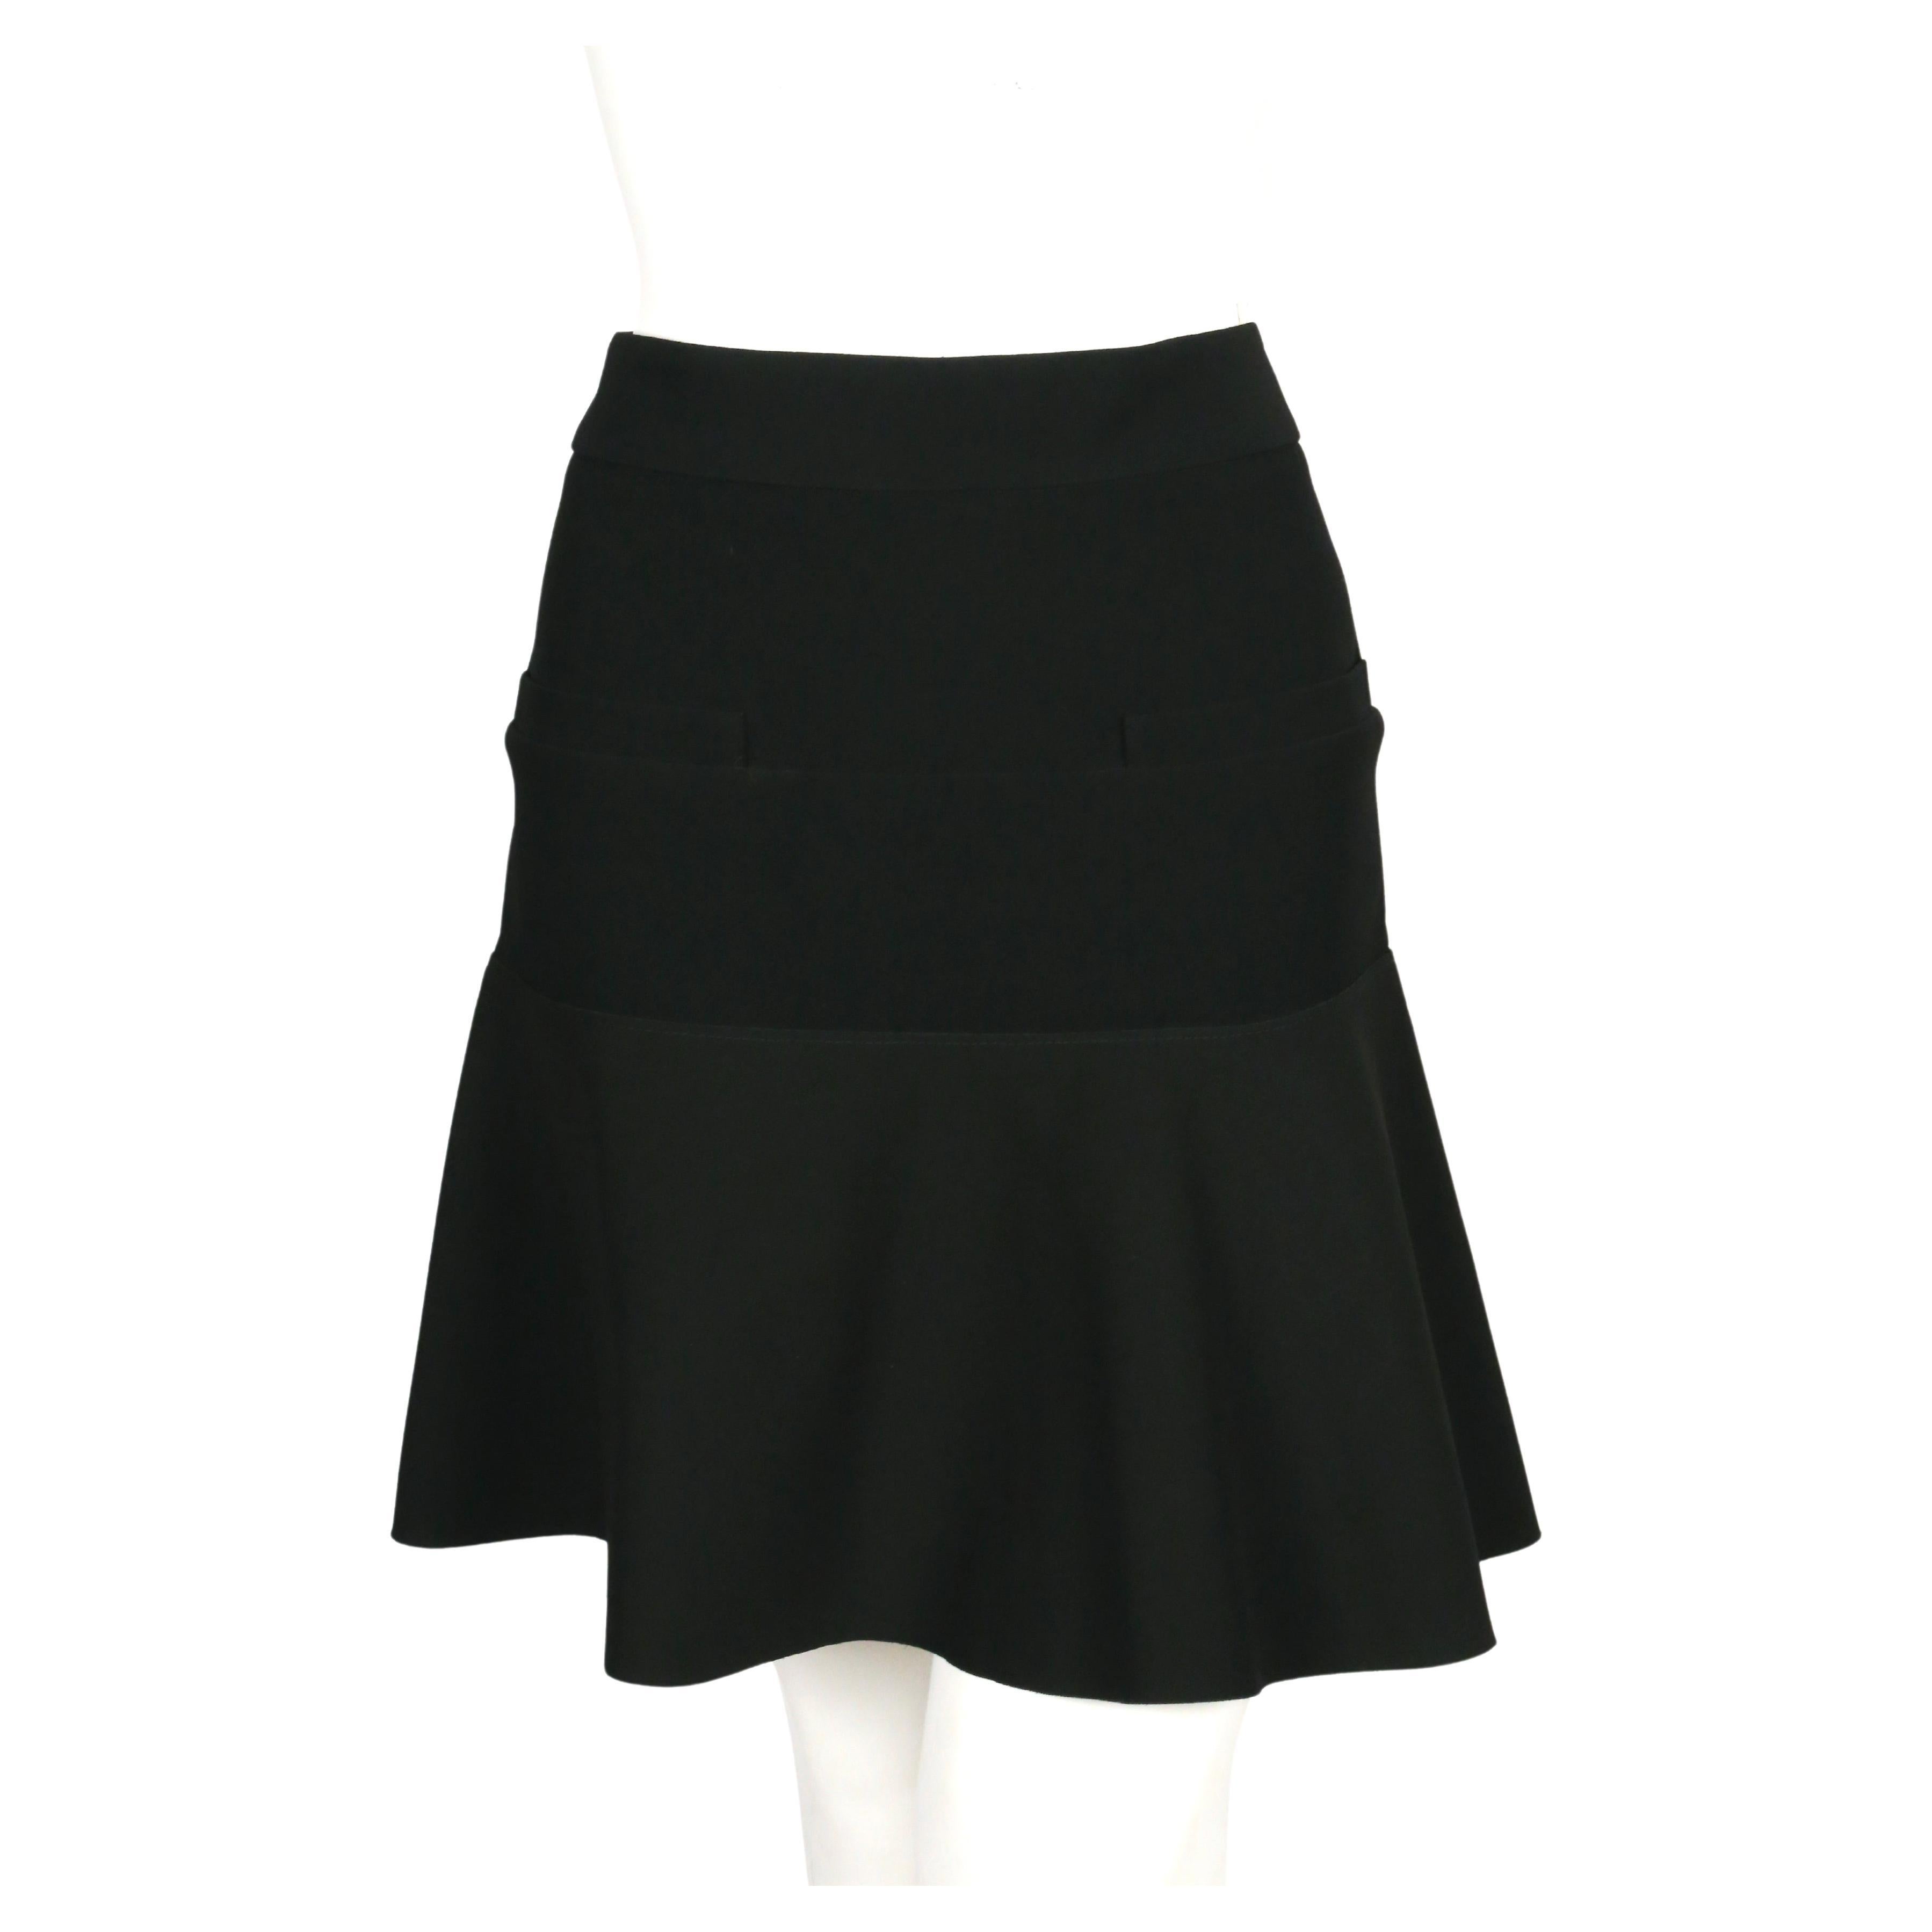 Black trumpet hem skirt designed by Phoebe Philo for Celine exactly as seen on the runway for spring of 2012, look #1. Very flattering and comfortable fit. Skirt is cleverly constructed of two different fabrics. Hem has a stiff fused fabric for a